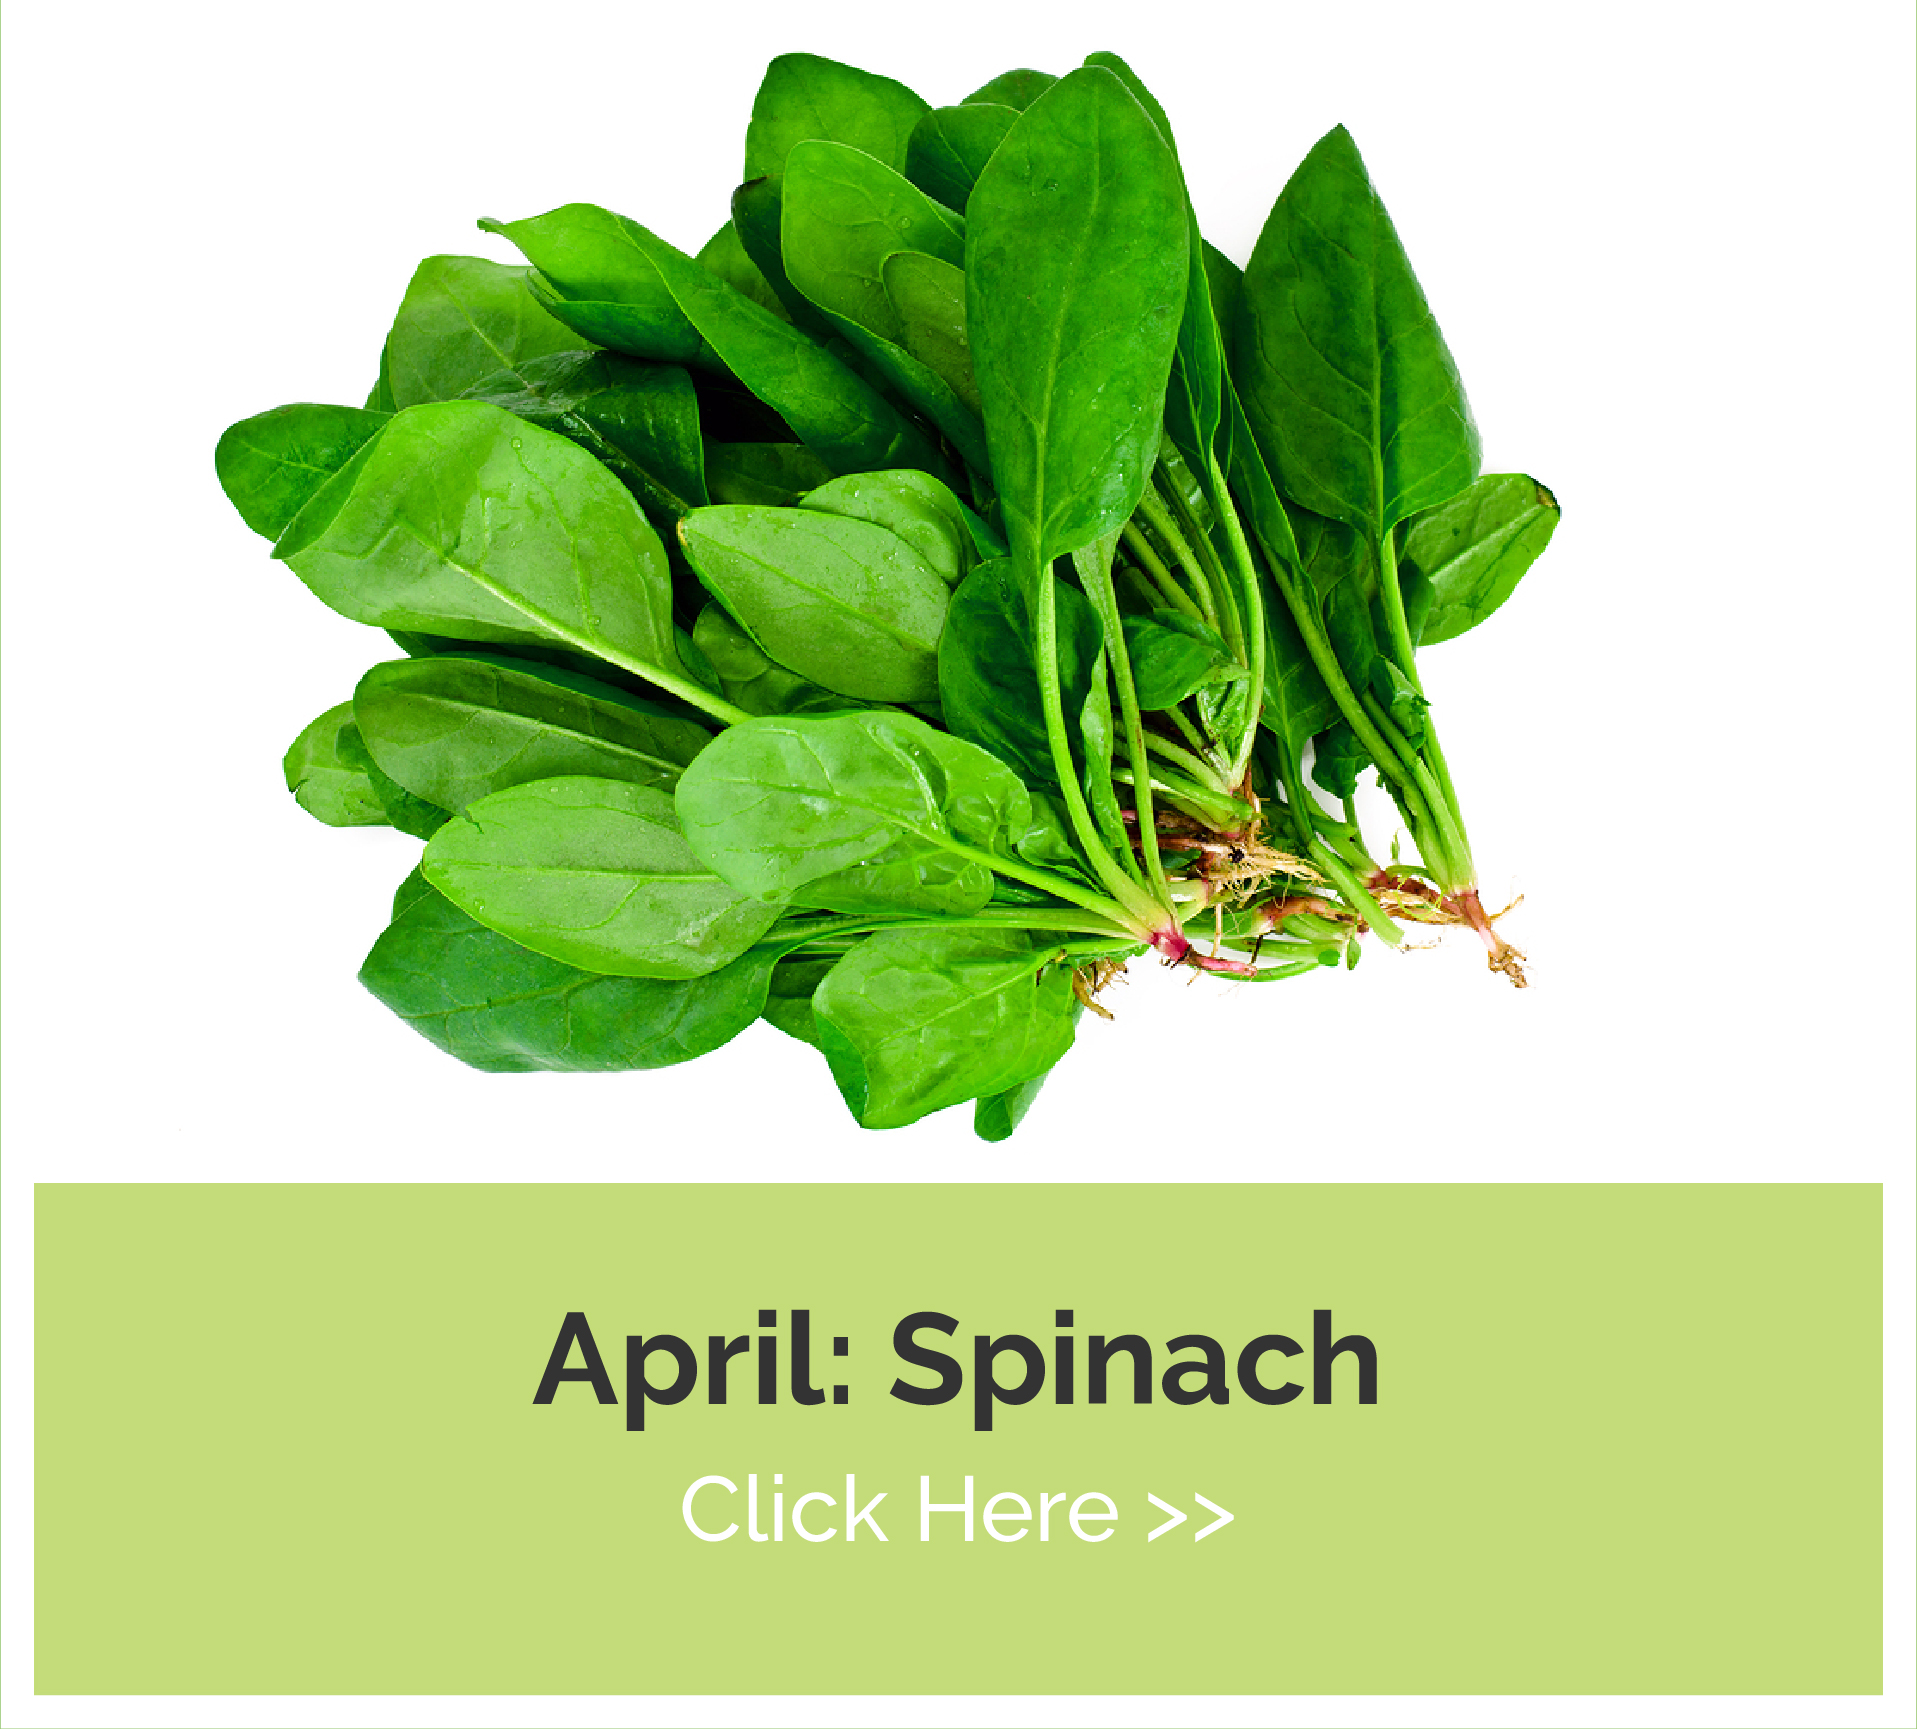 April Spinach - click here